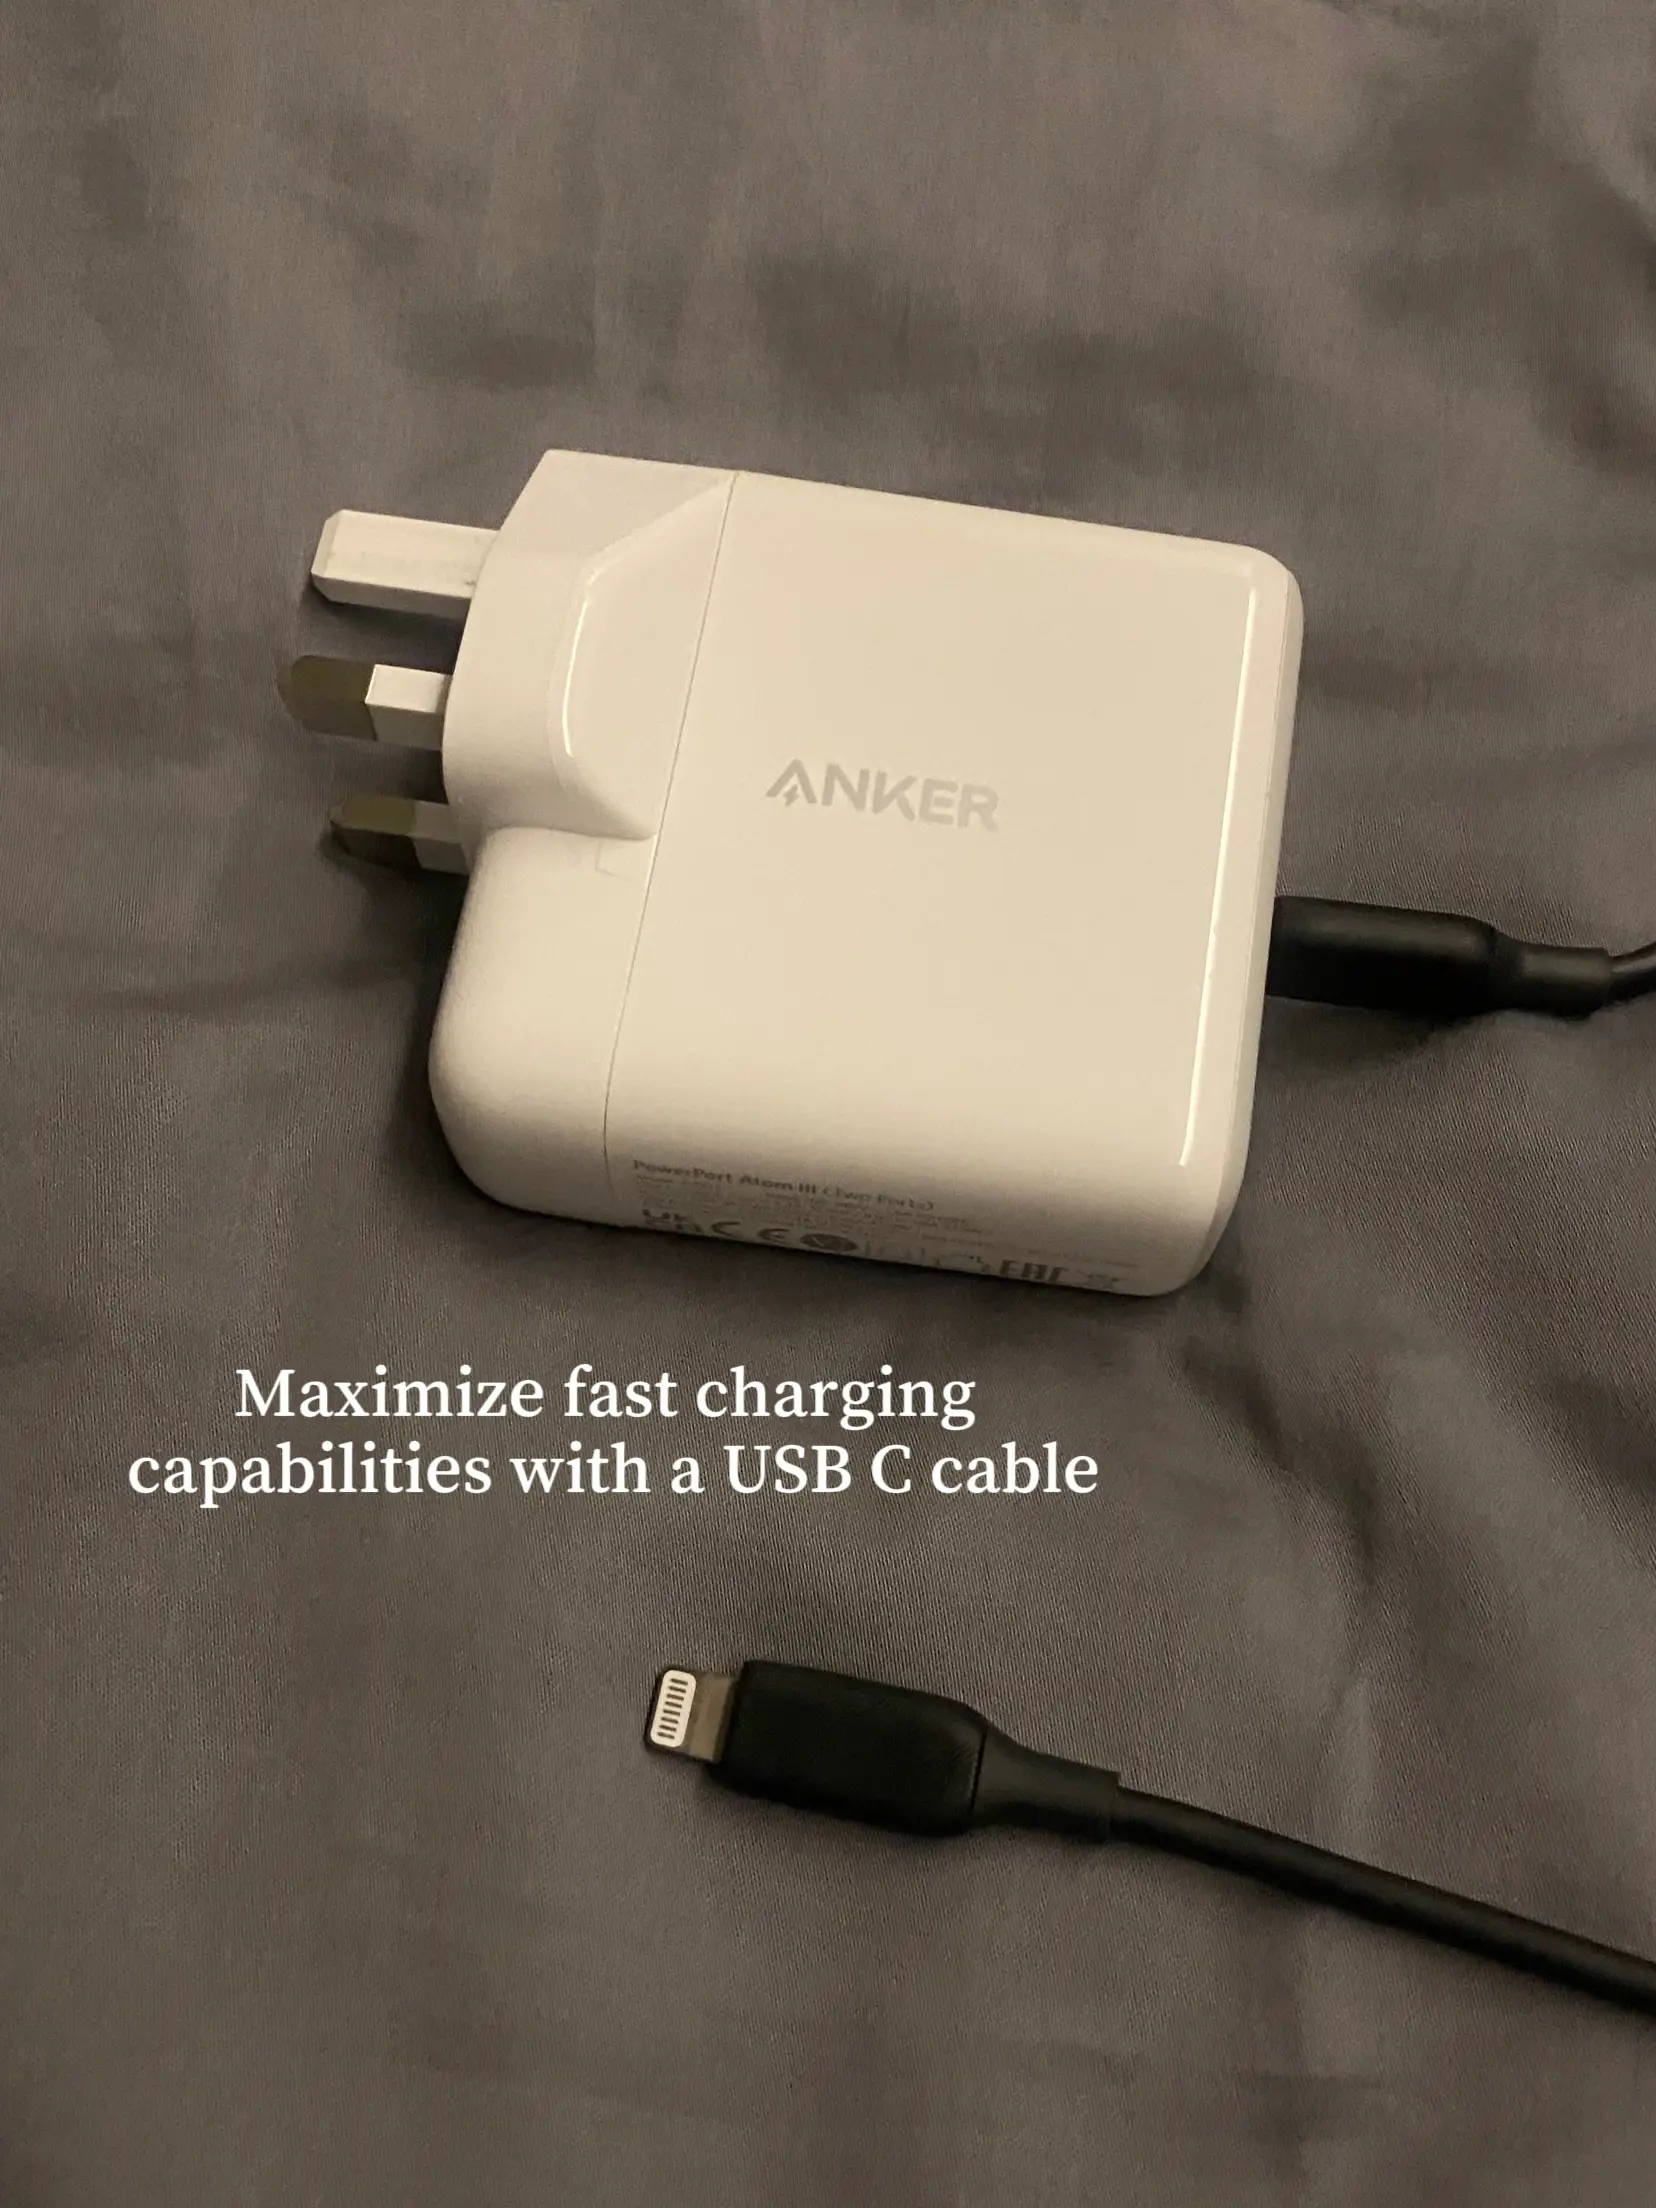 This Baseus wall charger will spoil you with 4 fast-charging ports